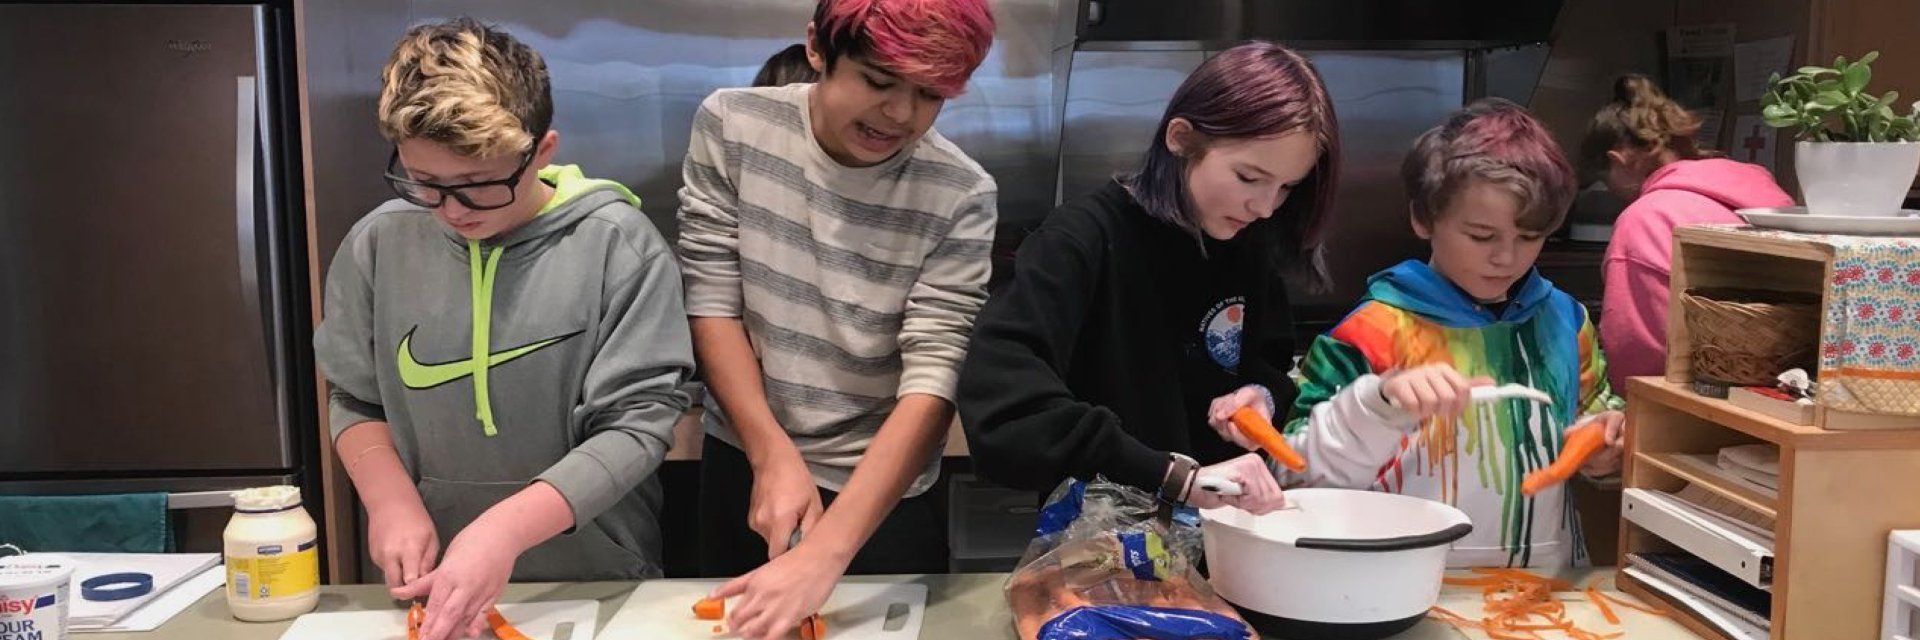 adolescent students peeling and cutting carrots